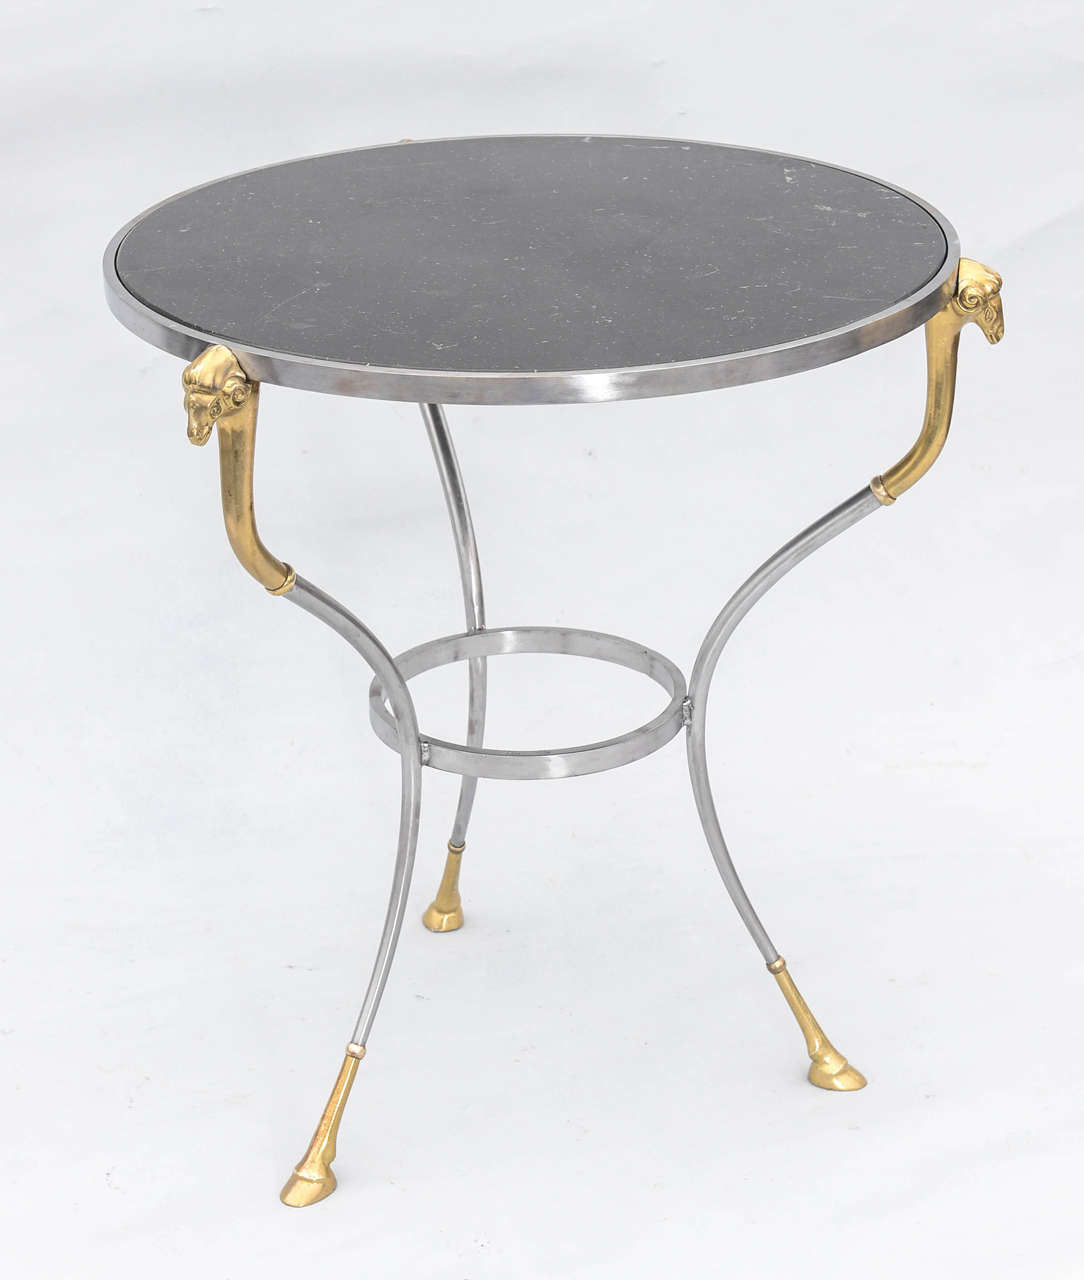 Gueridon, having black veined marble top inset in steel frame, raised on three legs each surmounted by a brass ram's head and terminating in a hoof foot, connected by a round stretcher.

Stock ID: D9175